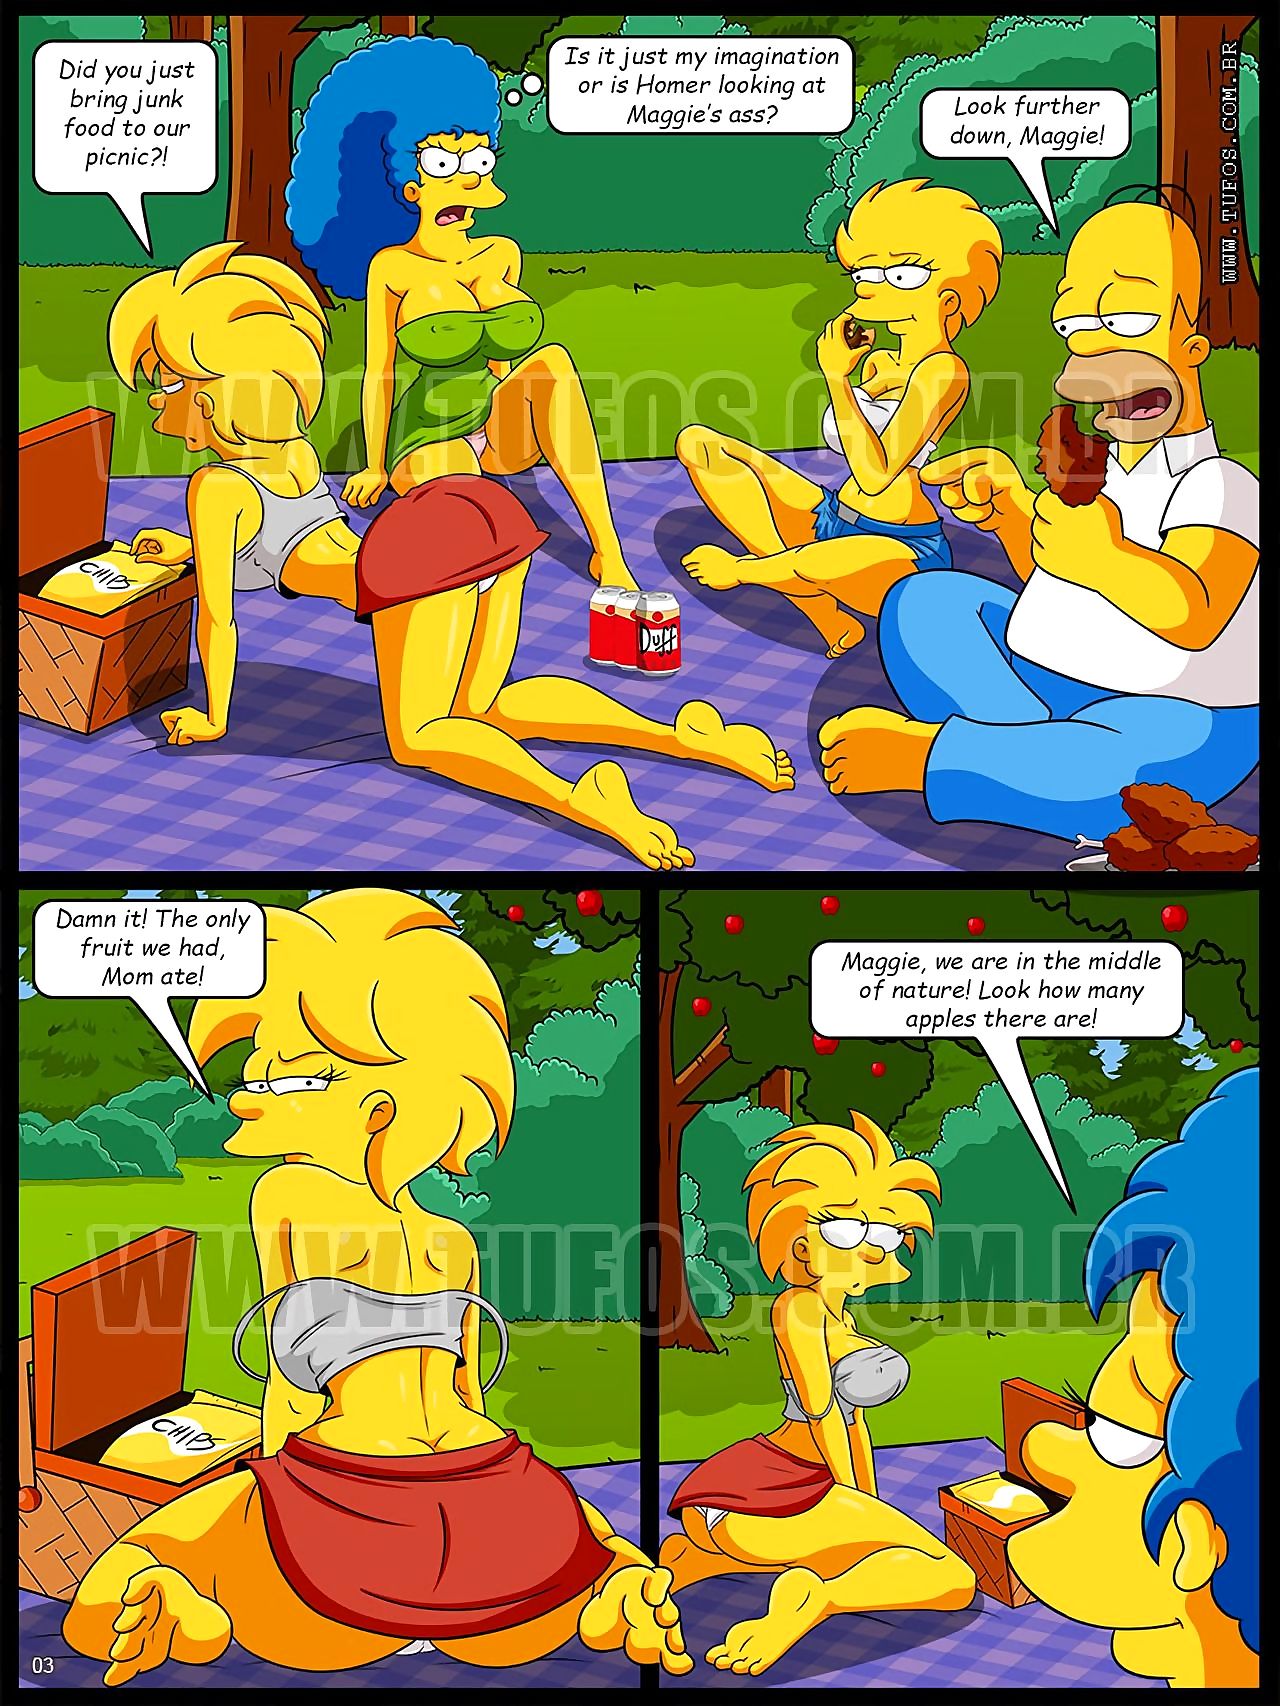 THES SIMPSONS PINIC TUFOS